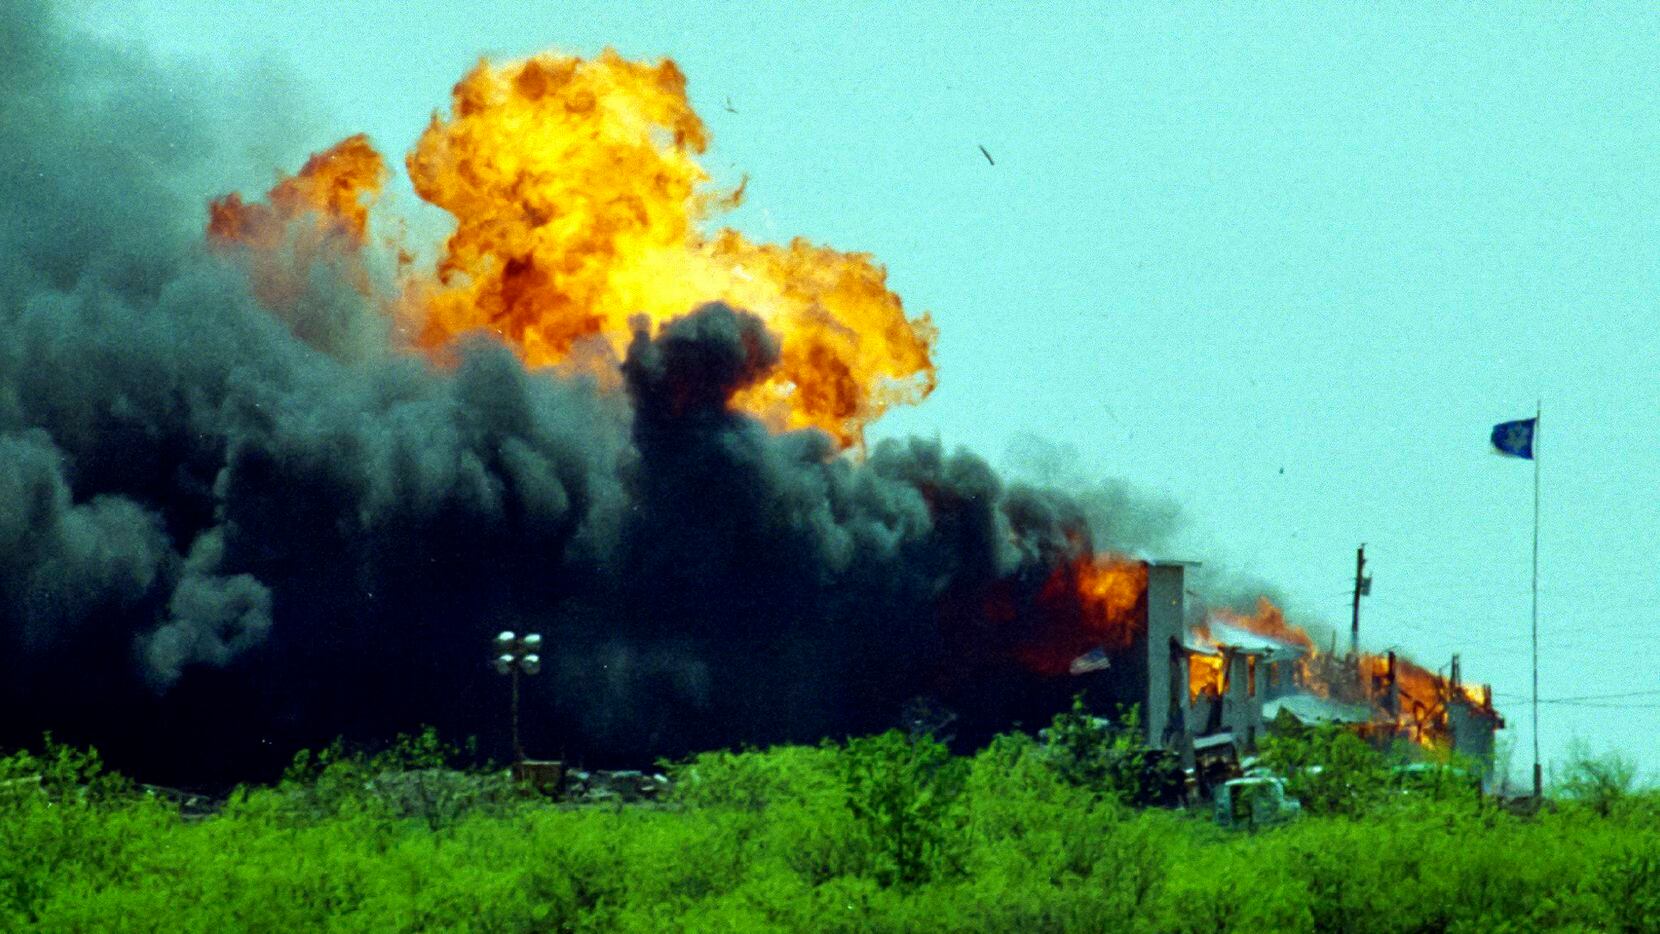 The Branch Davidian compound was rocked by an explosion after the Davidians set fire to it...